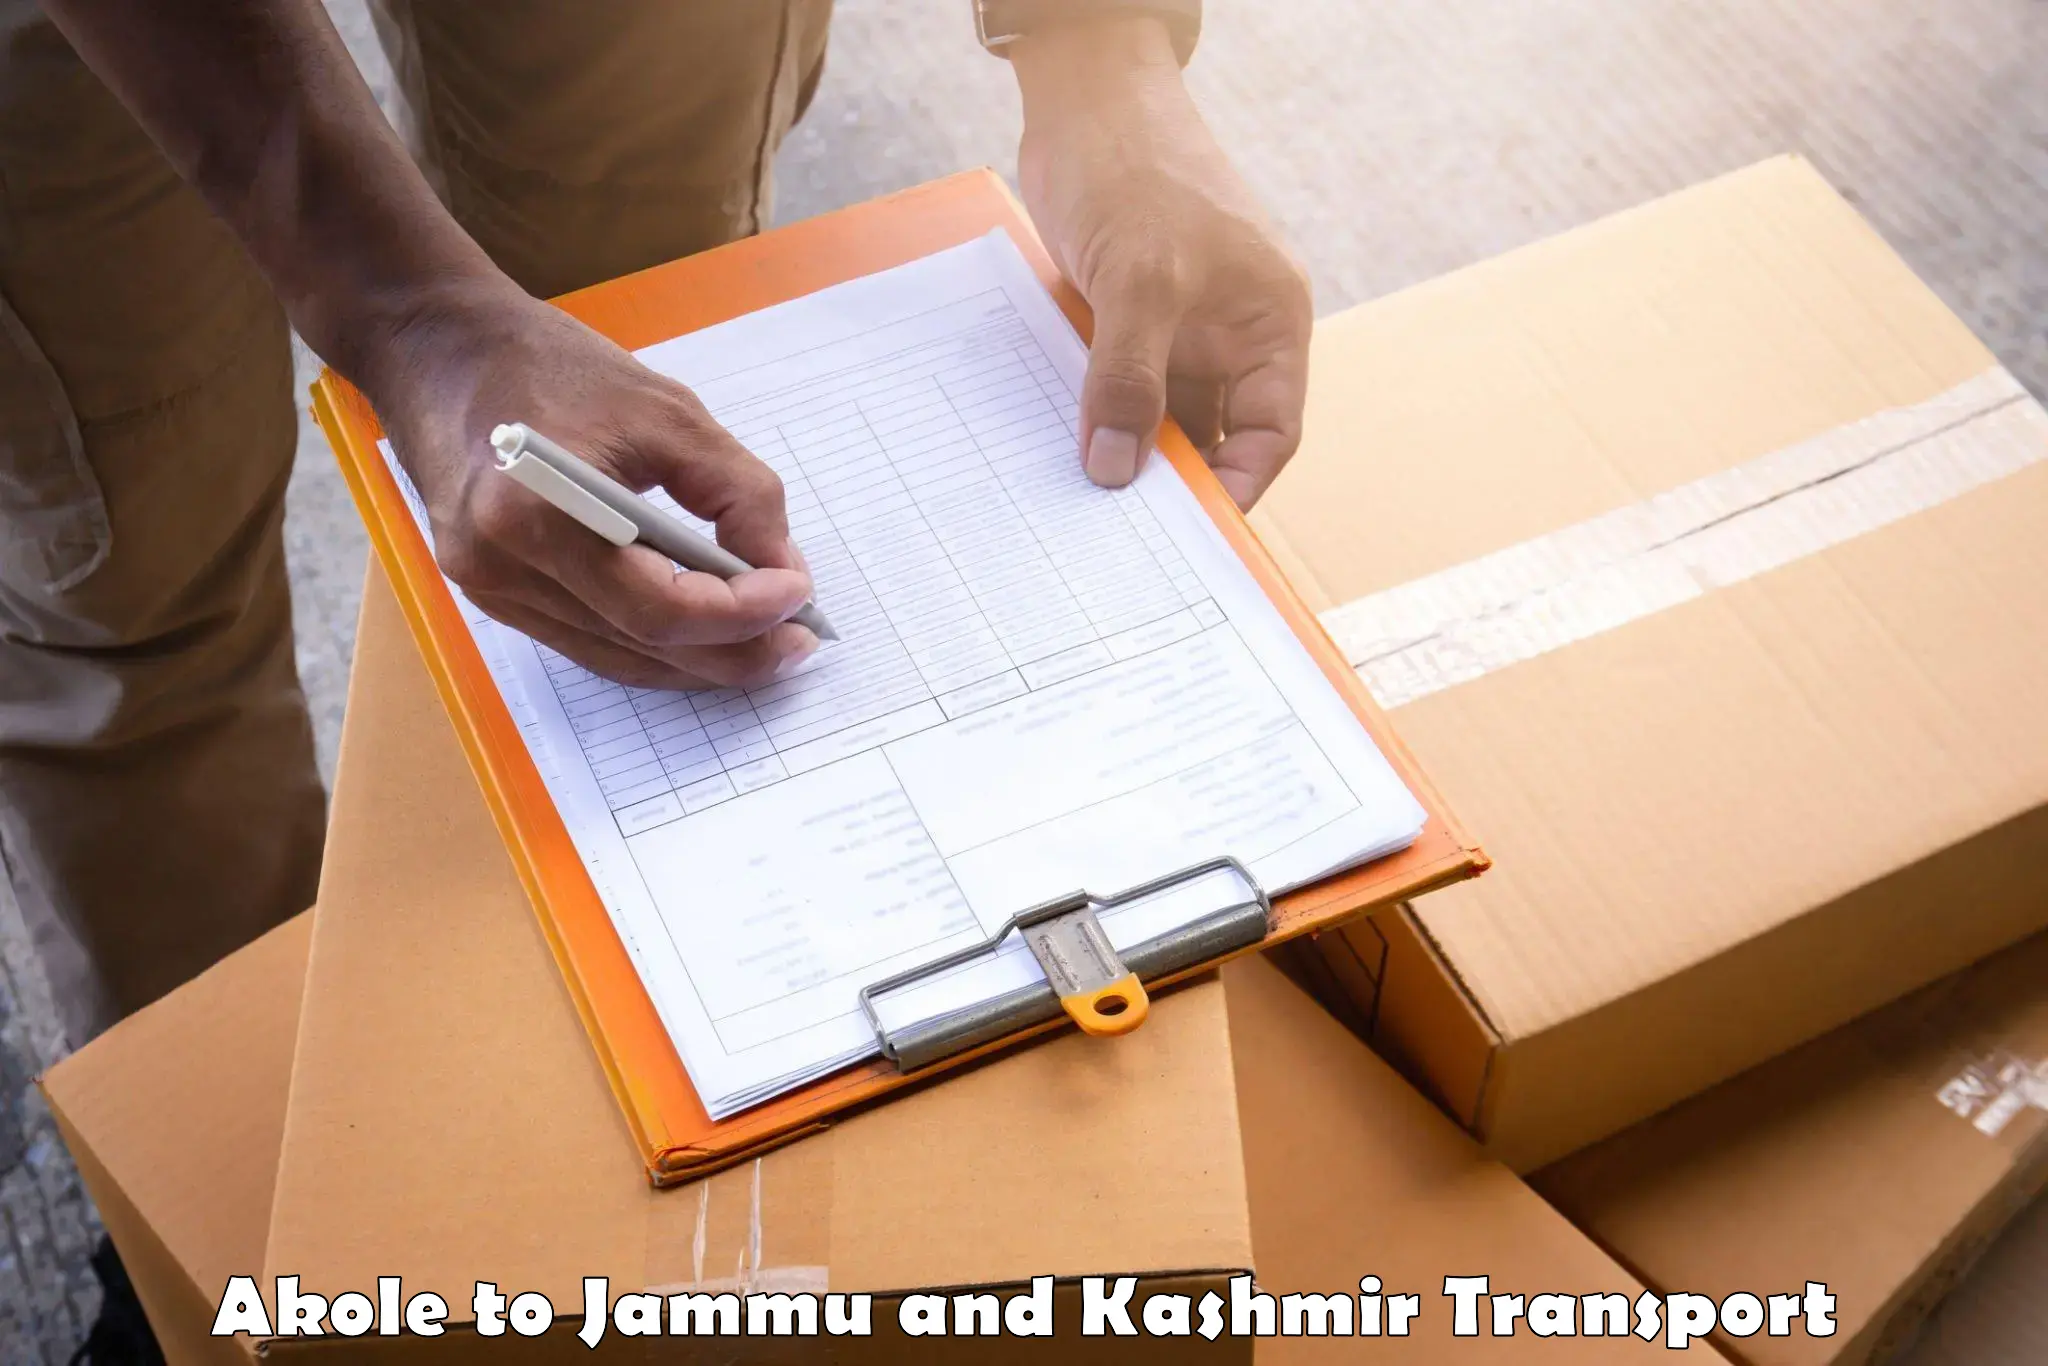 Container transportation services Akole to Jammu and Kashmir